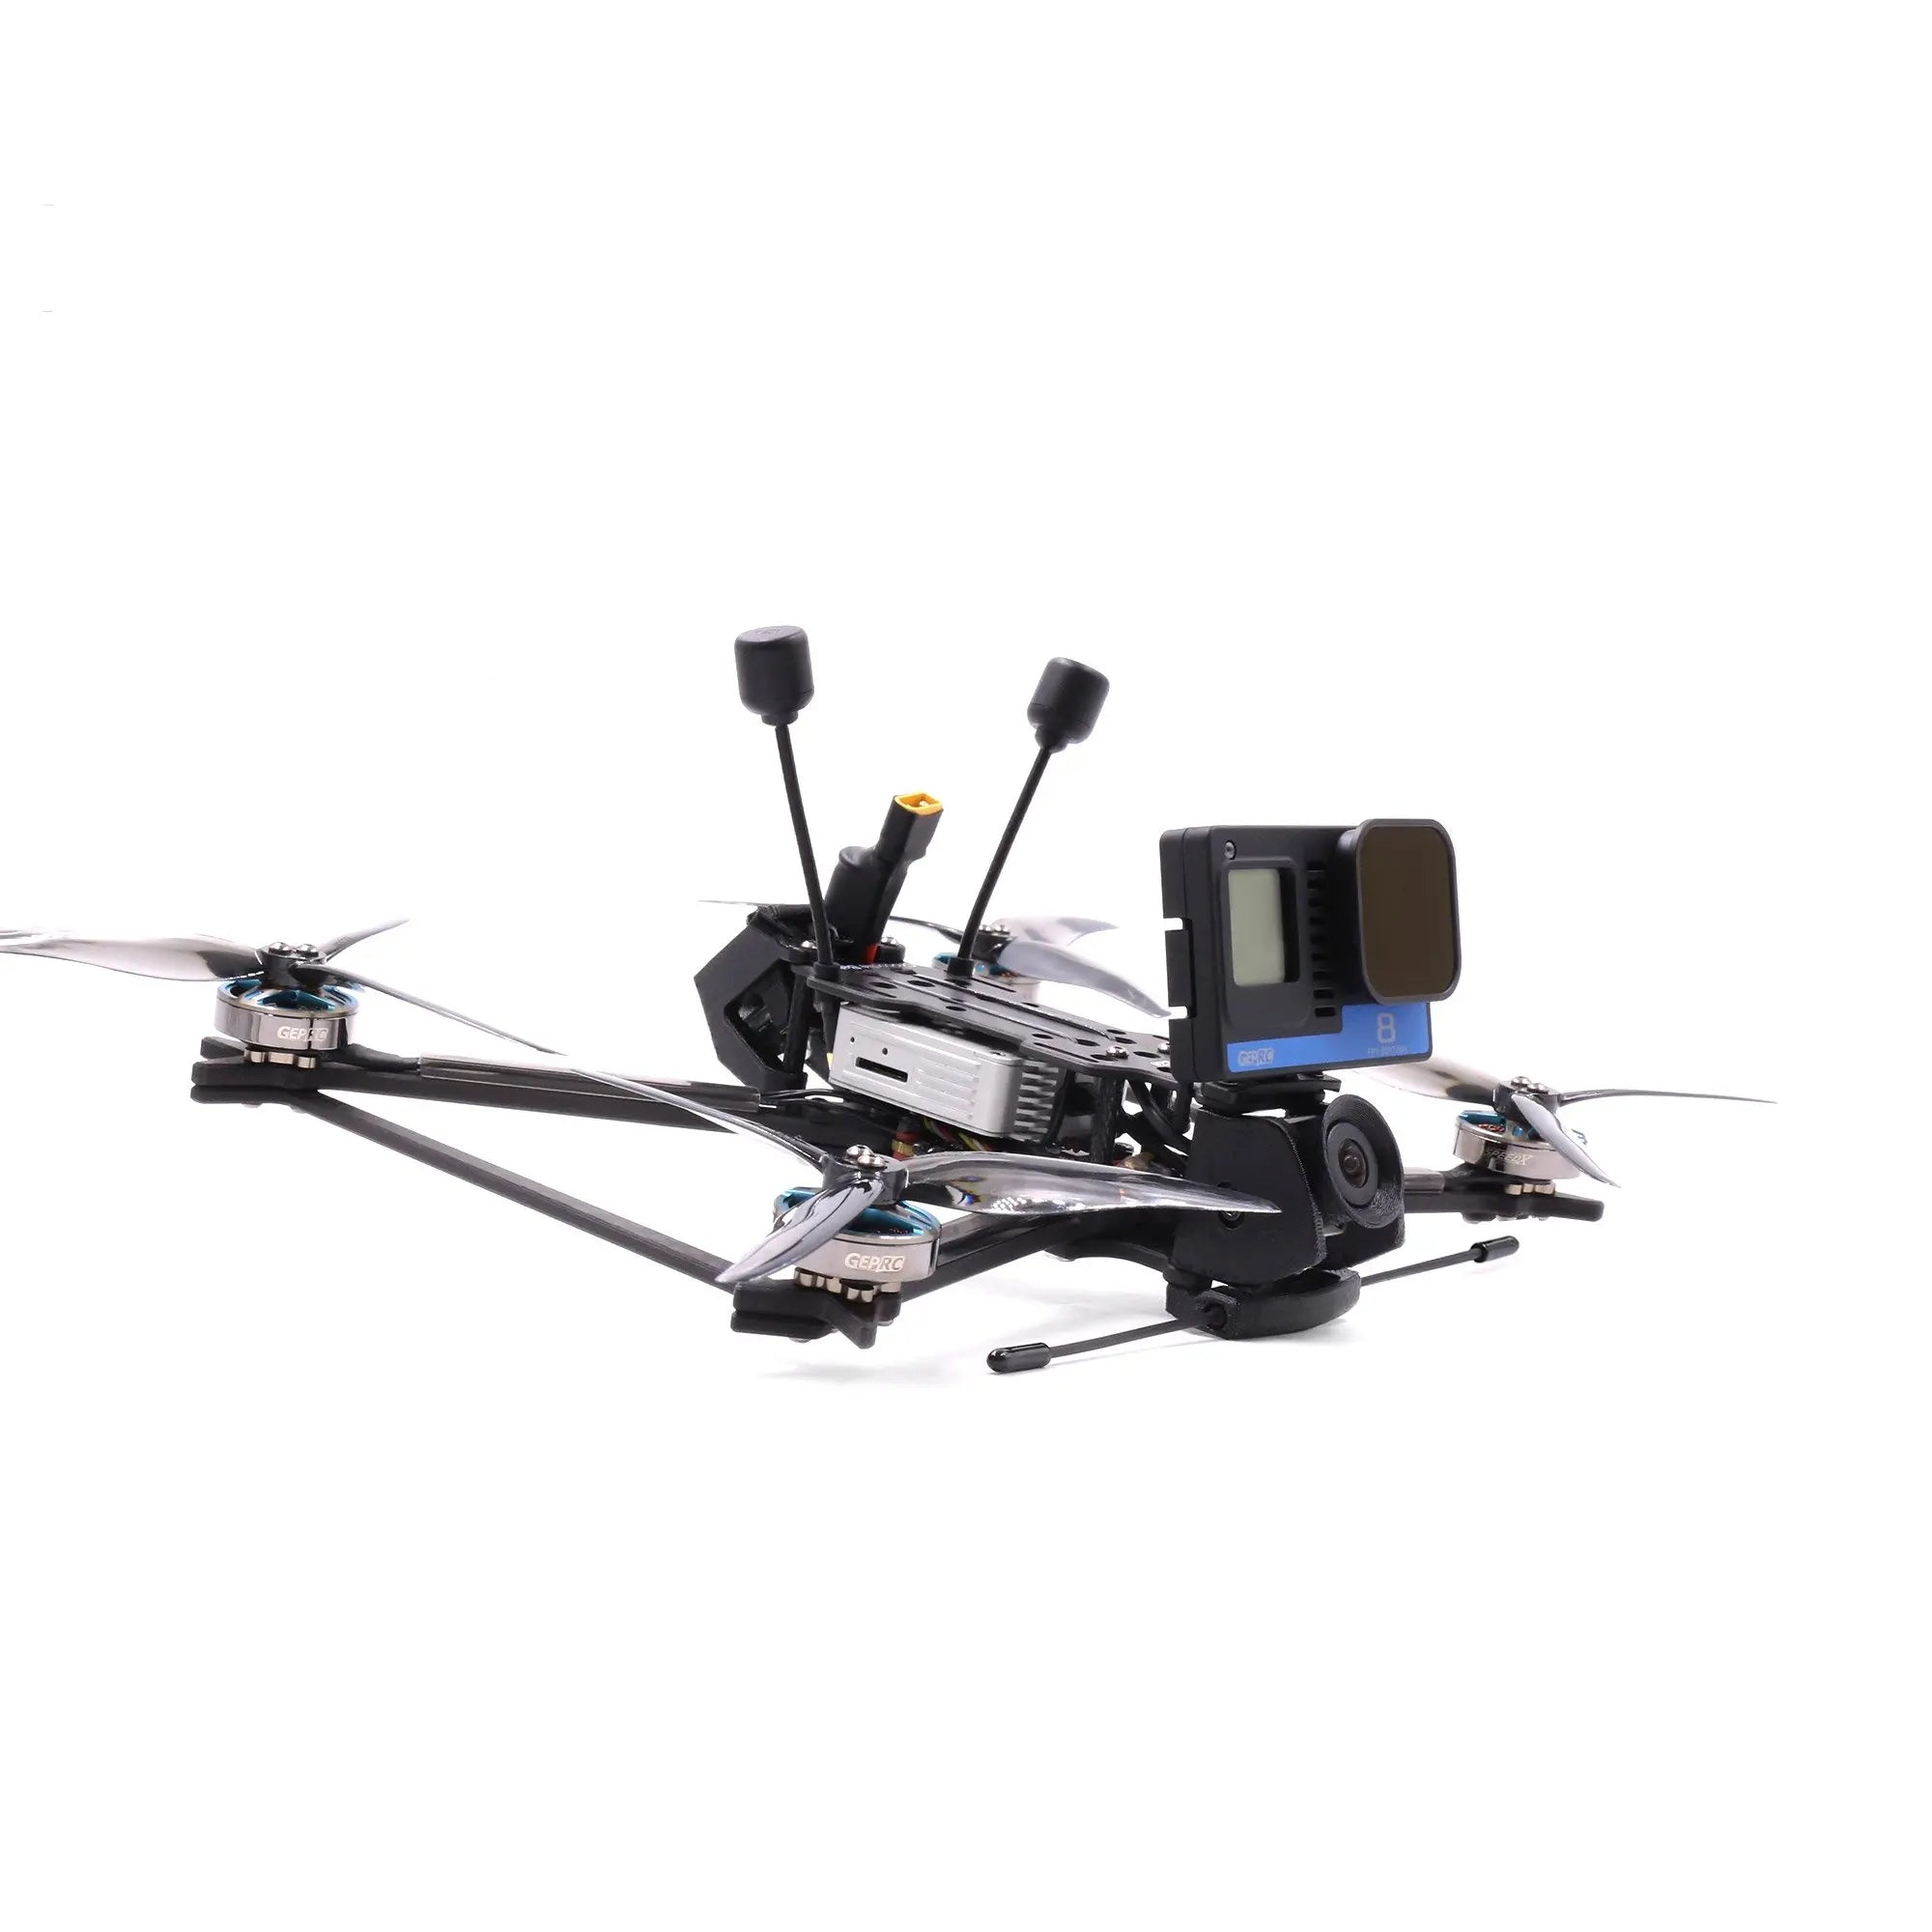 GEPRC Crocodile5 Baby FPV Drone, the latest GEP F722 AIO FC, which has fast operation speed and higher compatibil